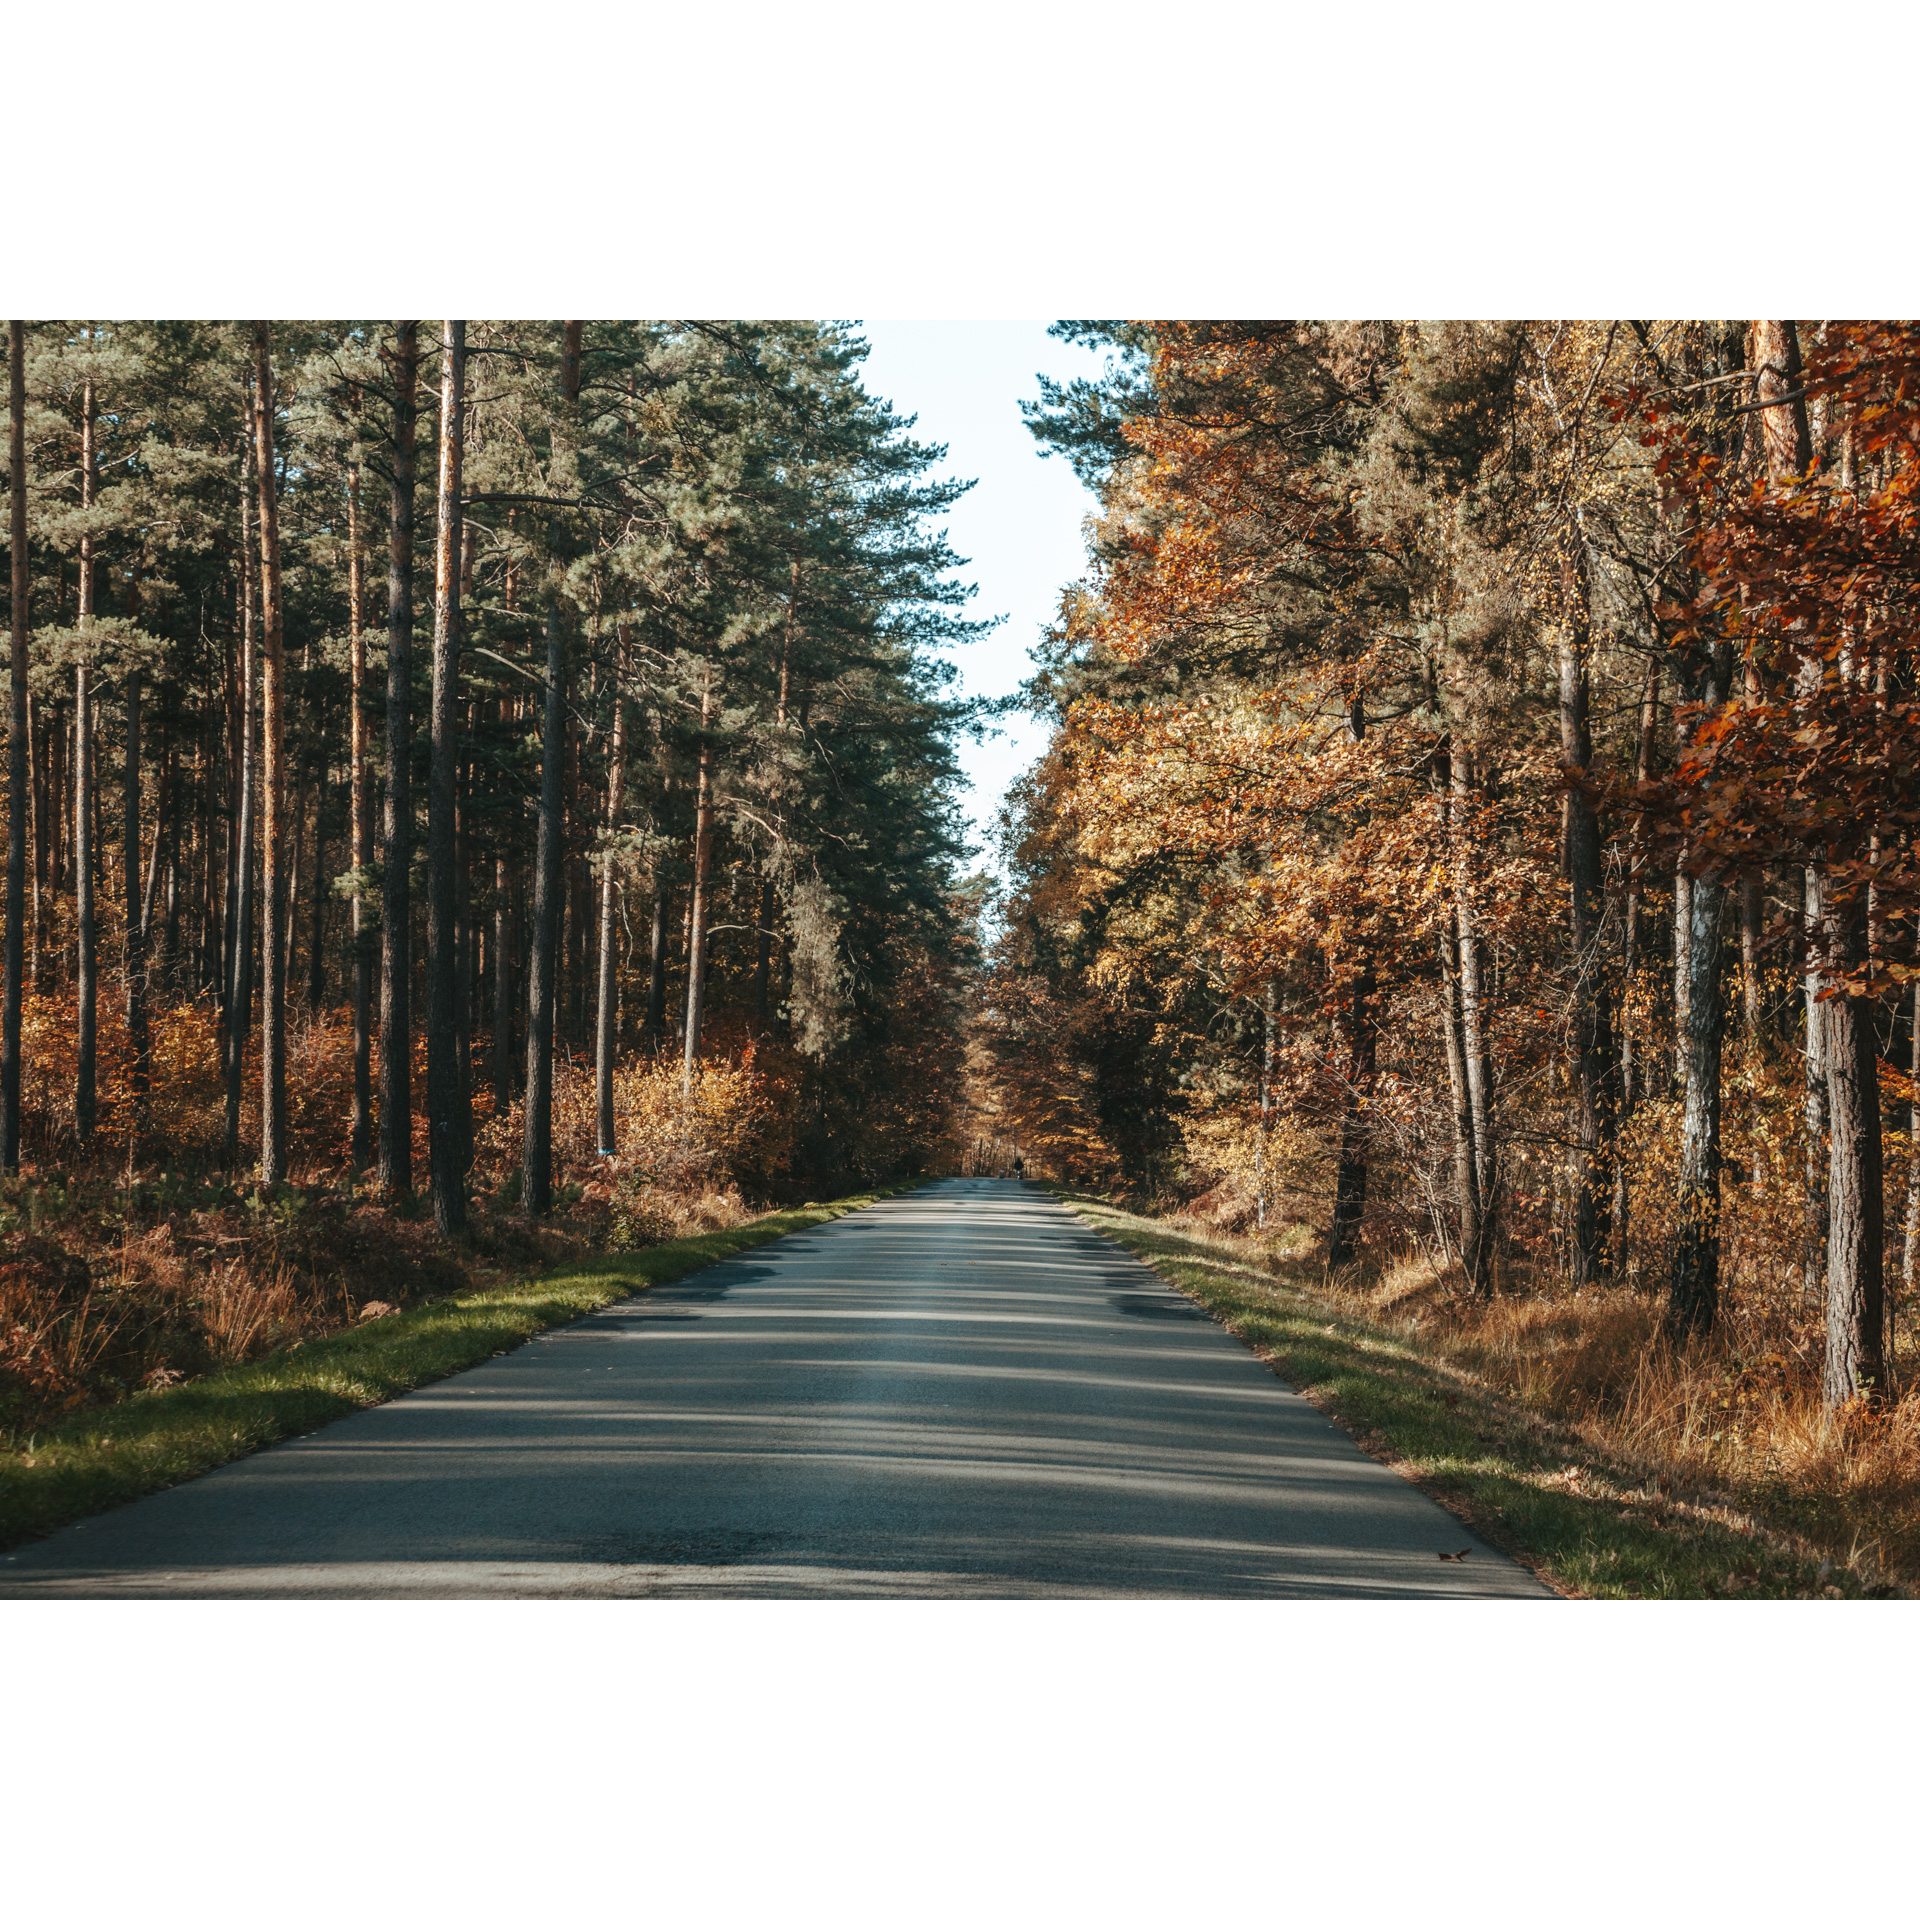 Asphalt road leading through the forest among tall coniferous trees